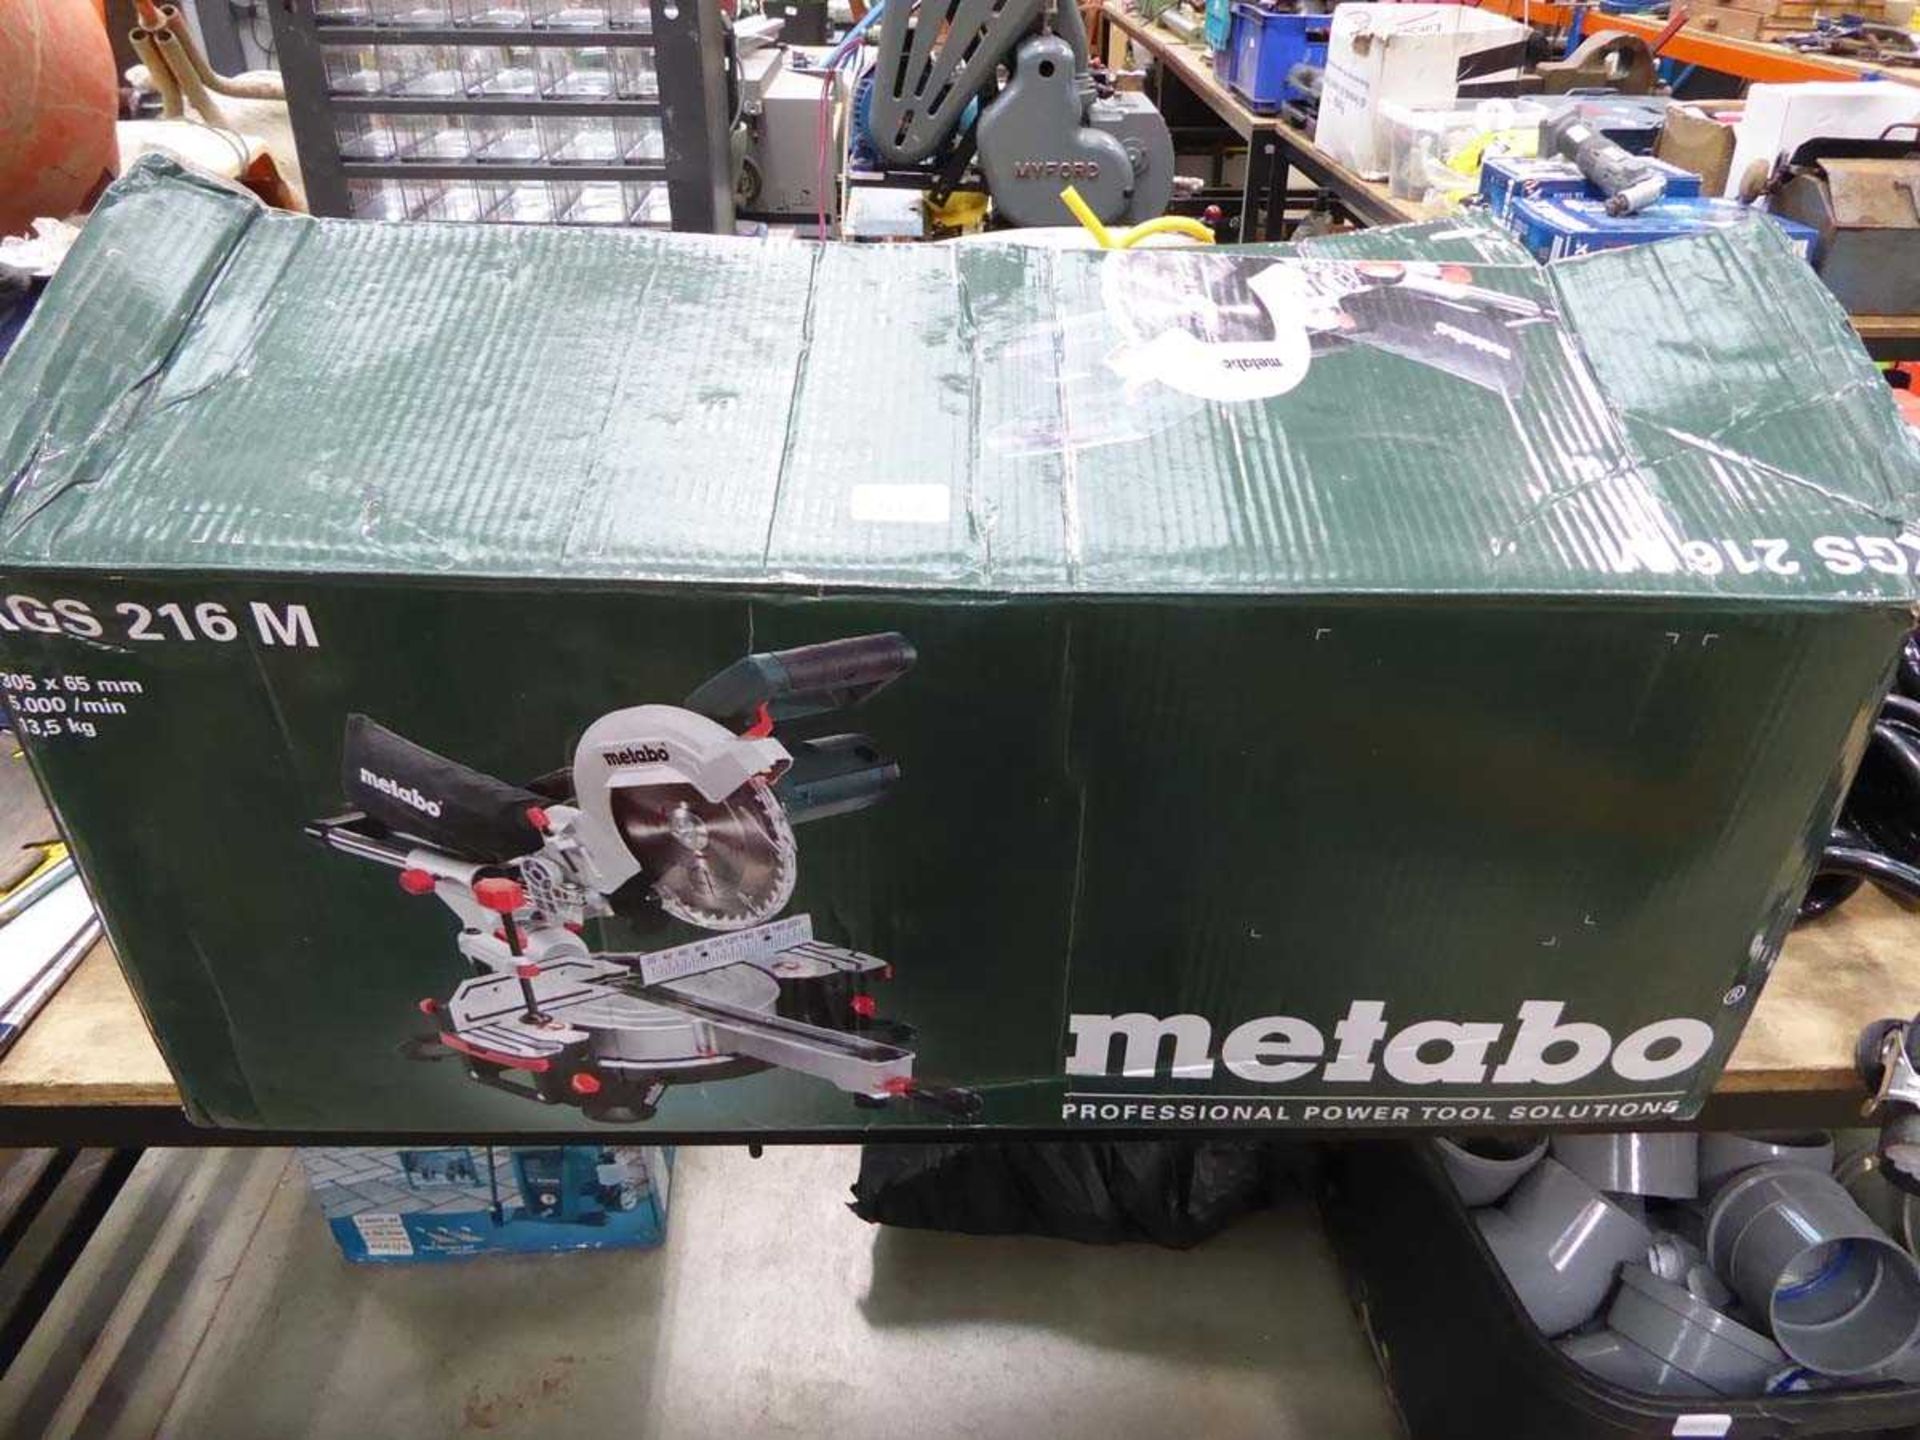 Metabo boxed chop saw